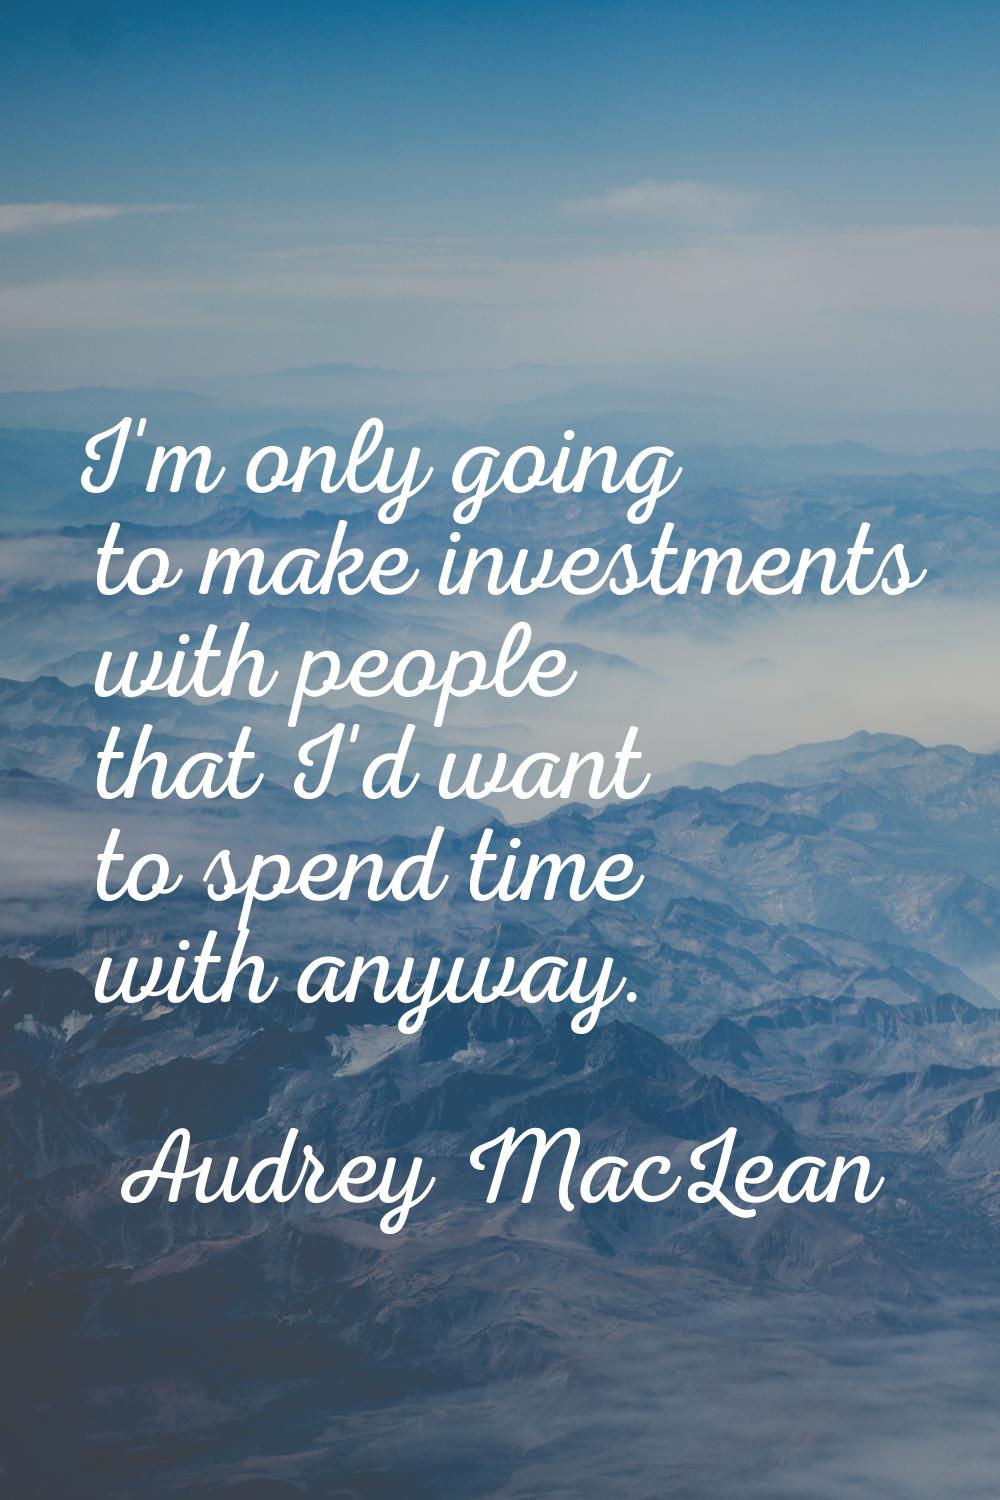 I'm only going to make investments with people that I'd want to spend time with anyway.